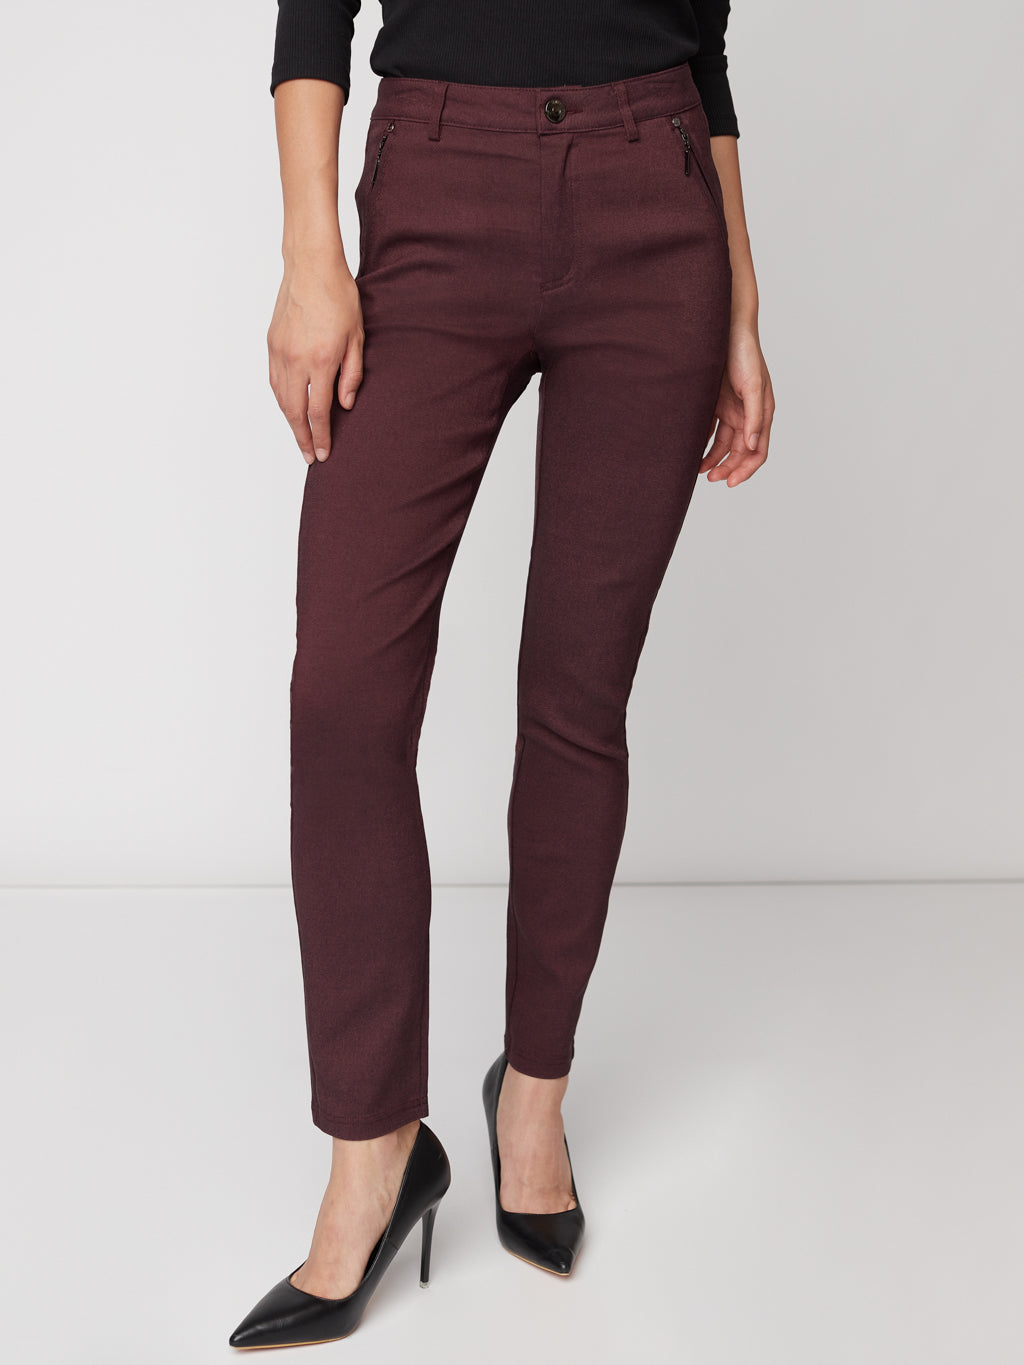 Narrow fitted pant